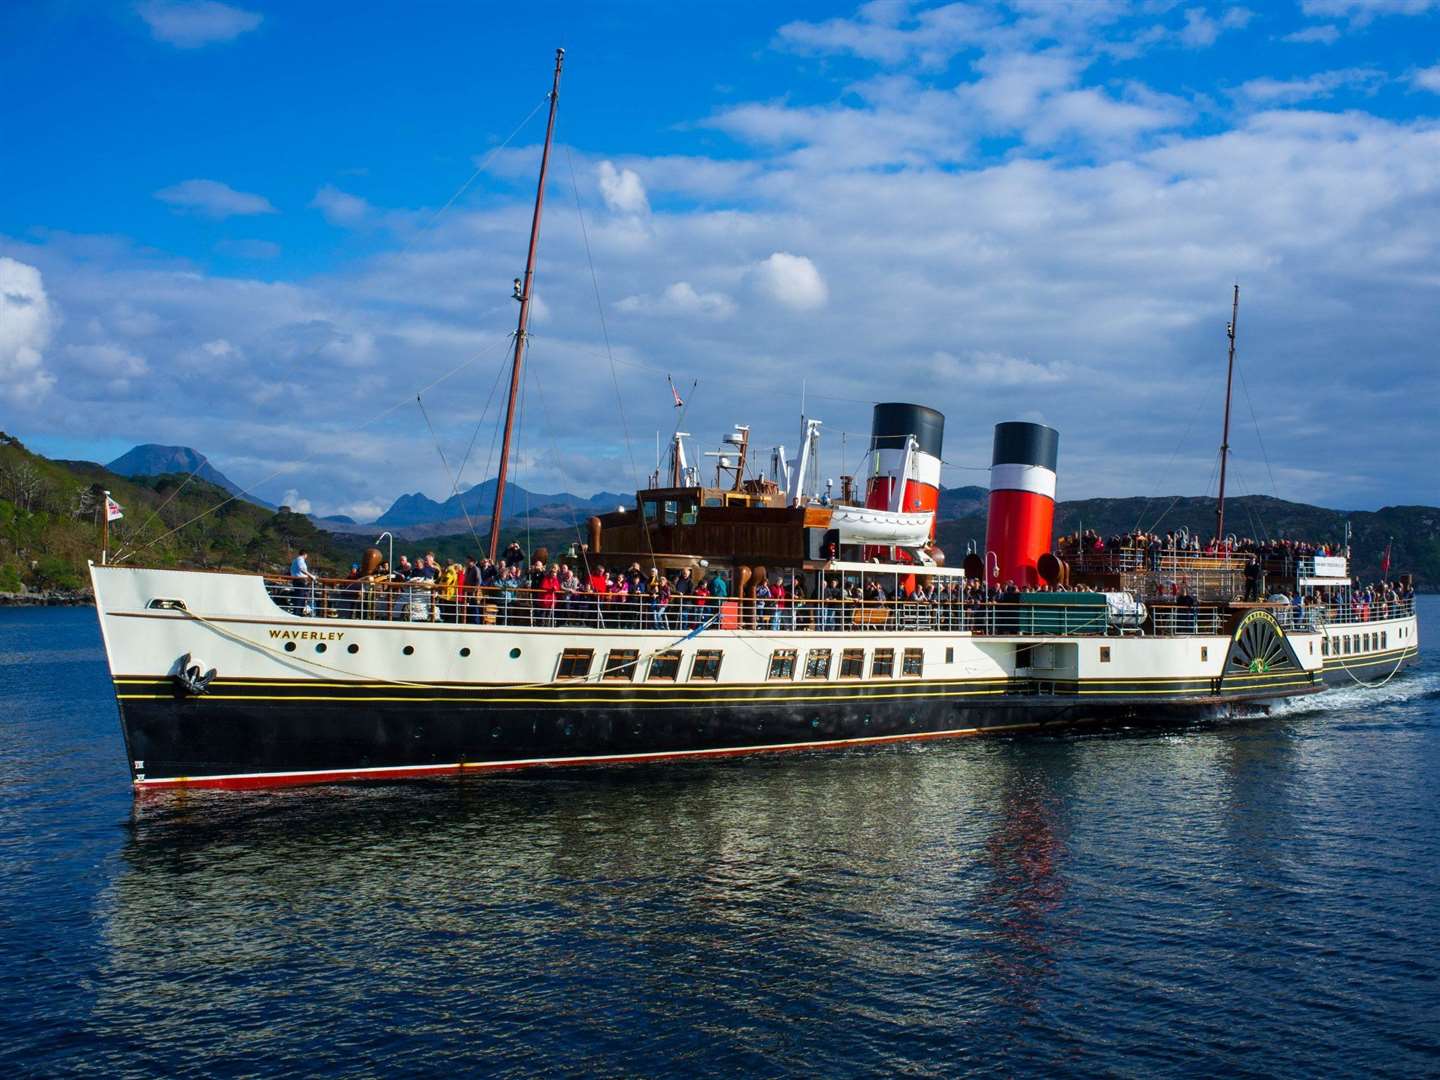 The Waverley paddle steamer.